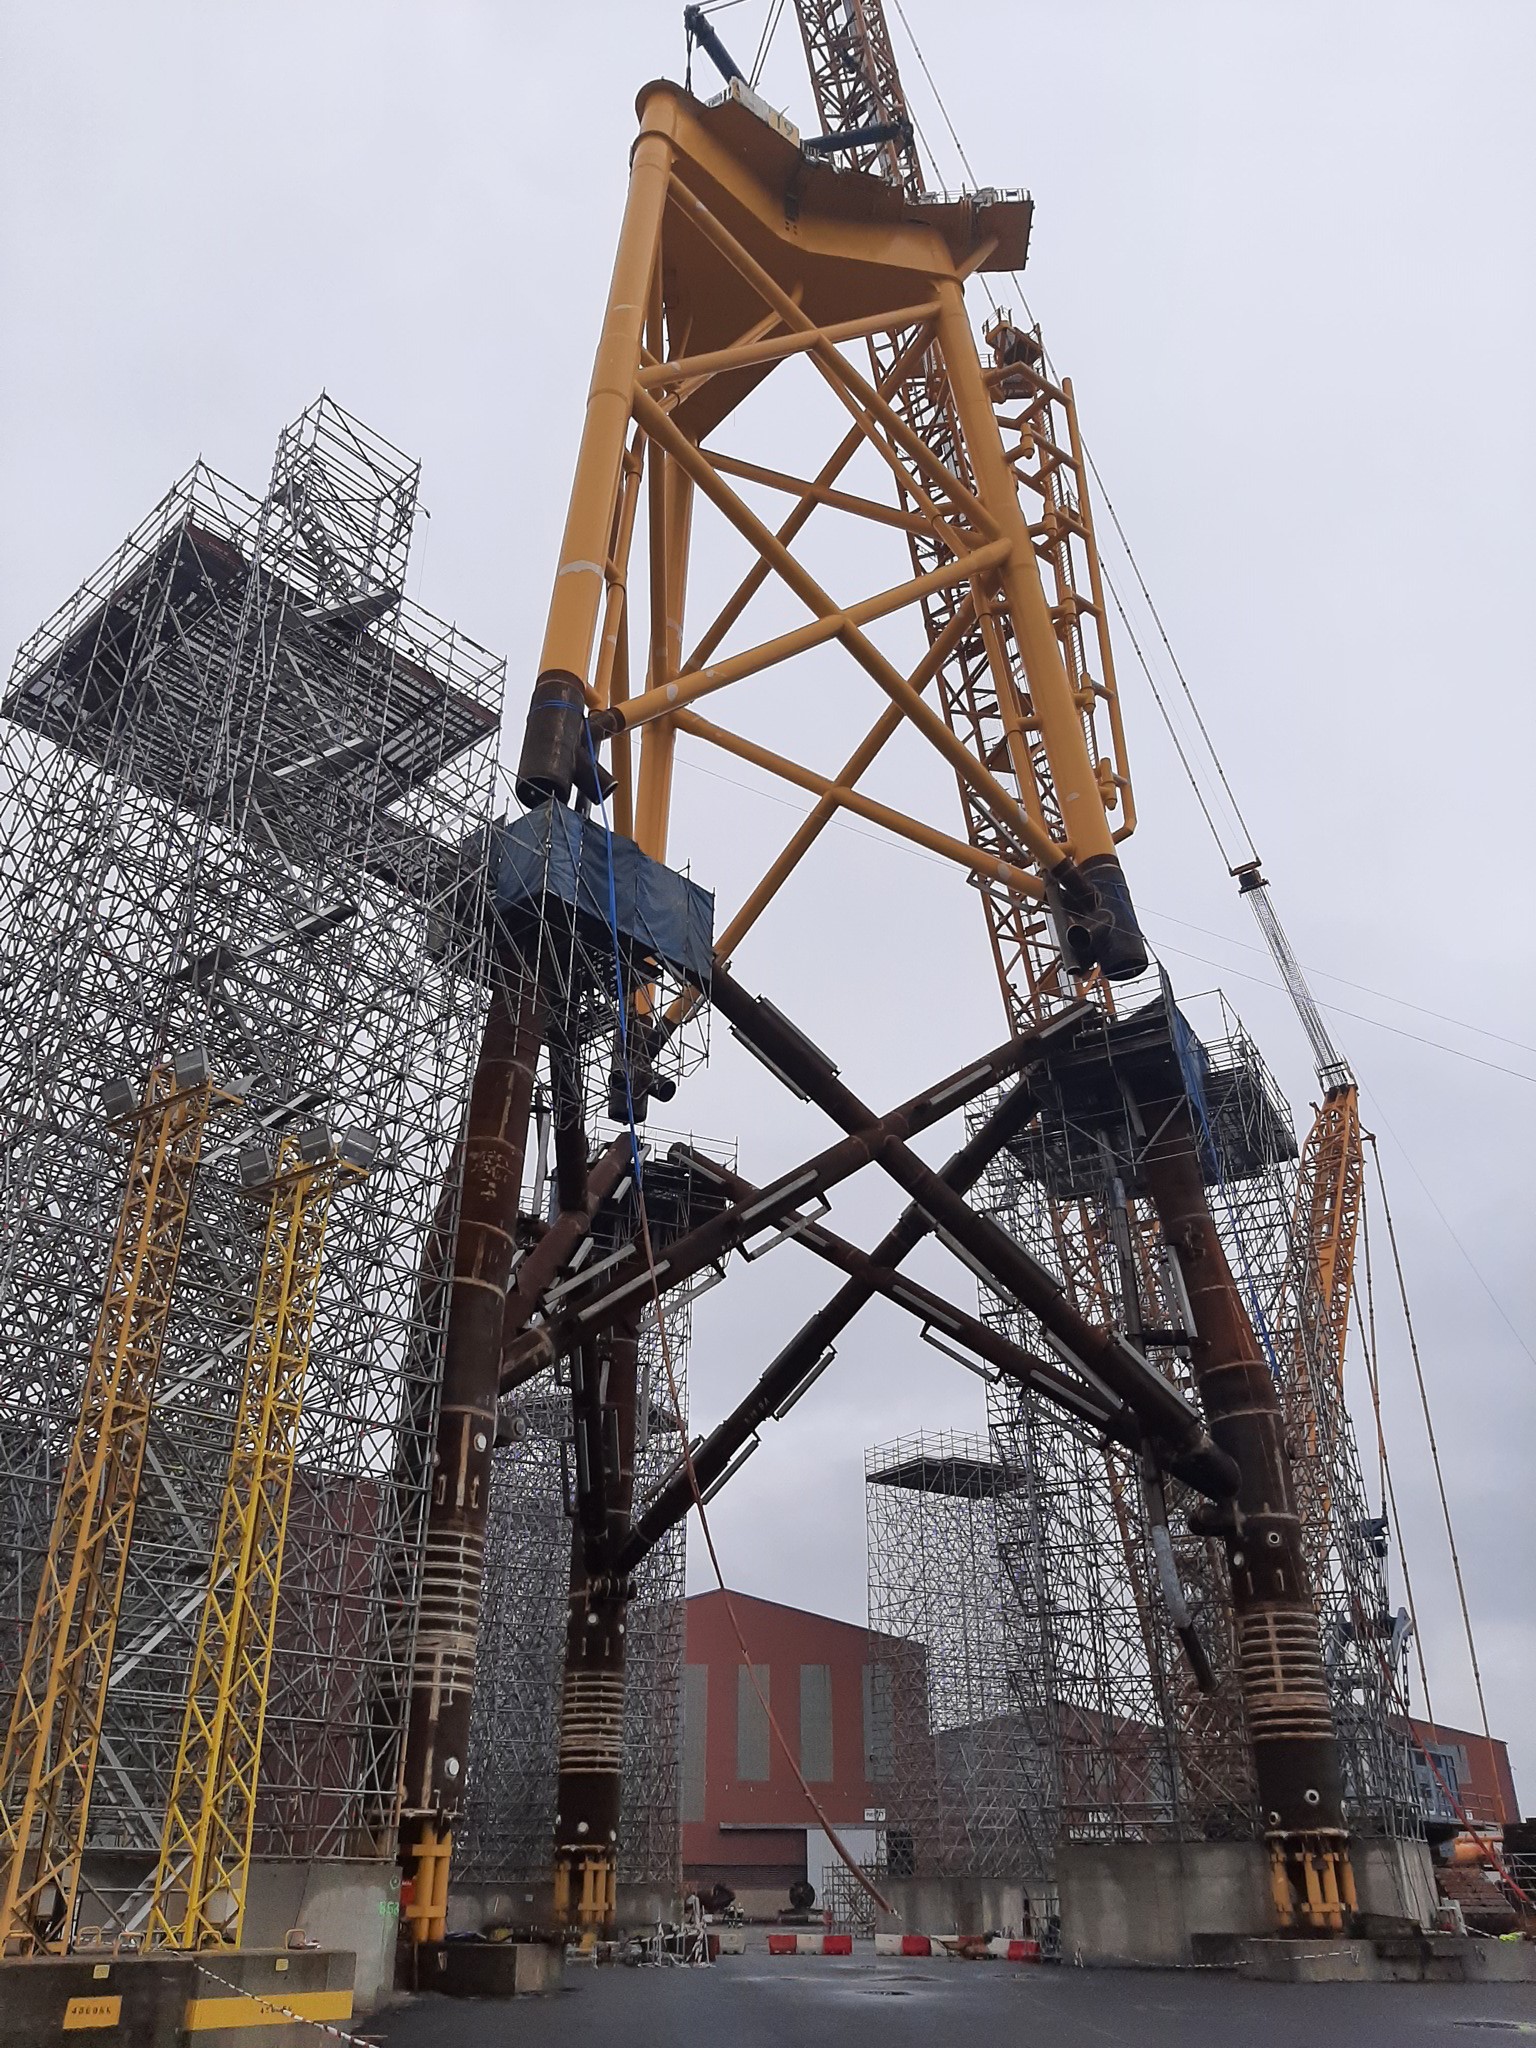 The first jacket foundation assembled at Navantia yard in Fene, Spain